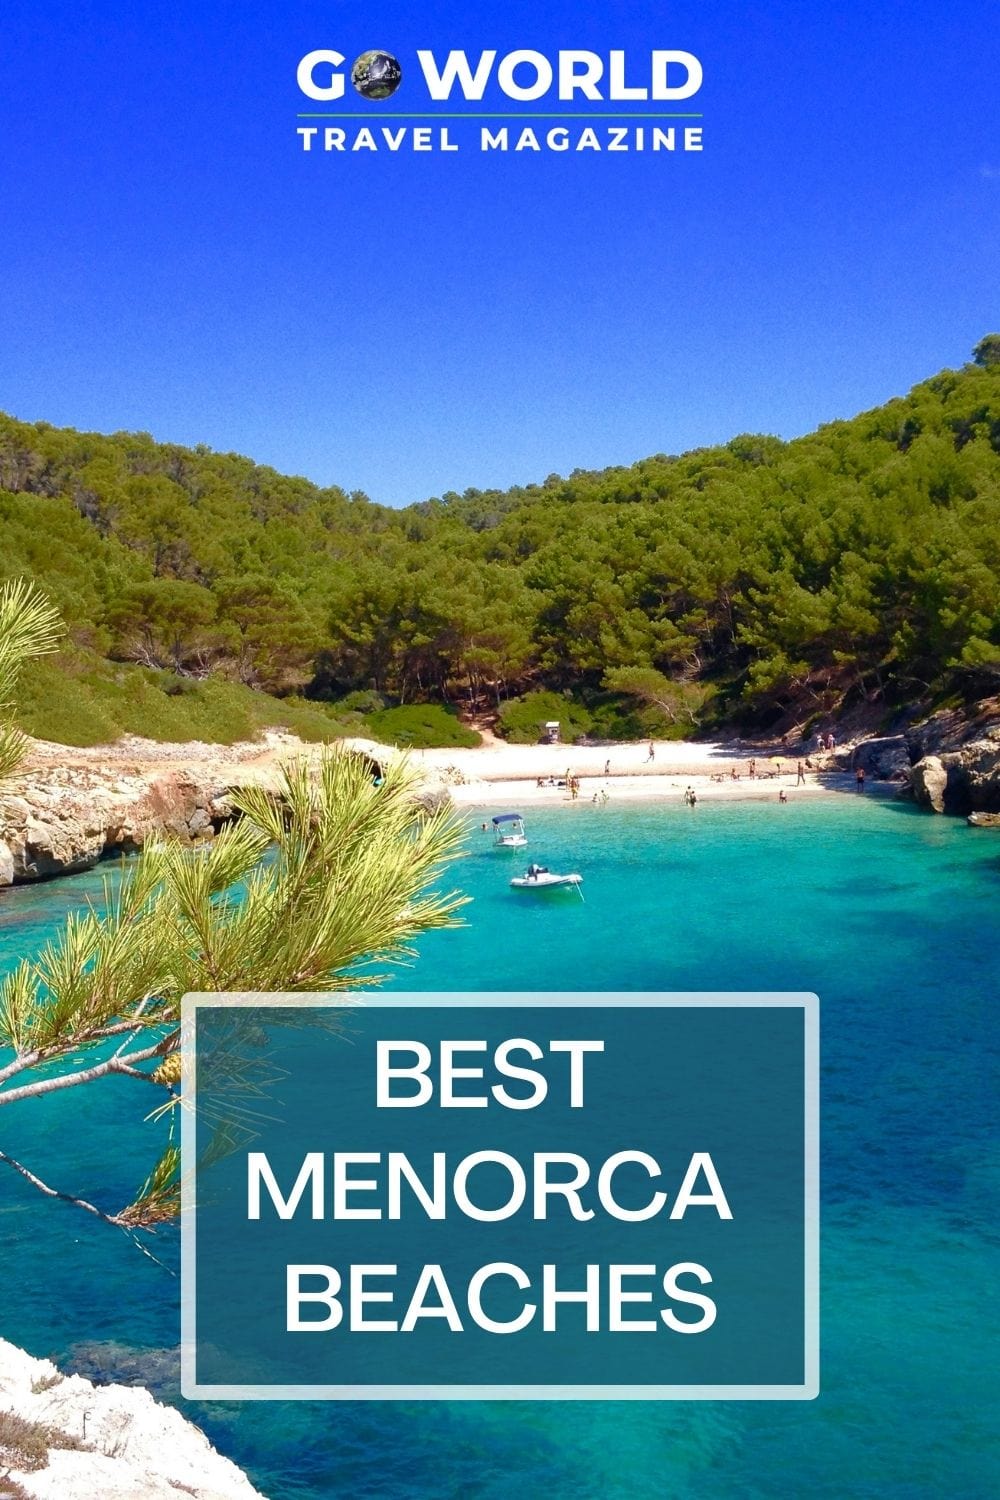 This gem of the Balearic Islands is the perfect place to enjoy the tranquility of its nature with this list of the best beaches in Menorca. #Menorcabeaches #menorcaspain